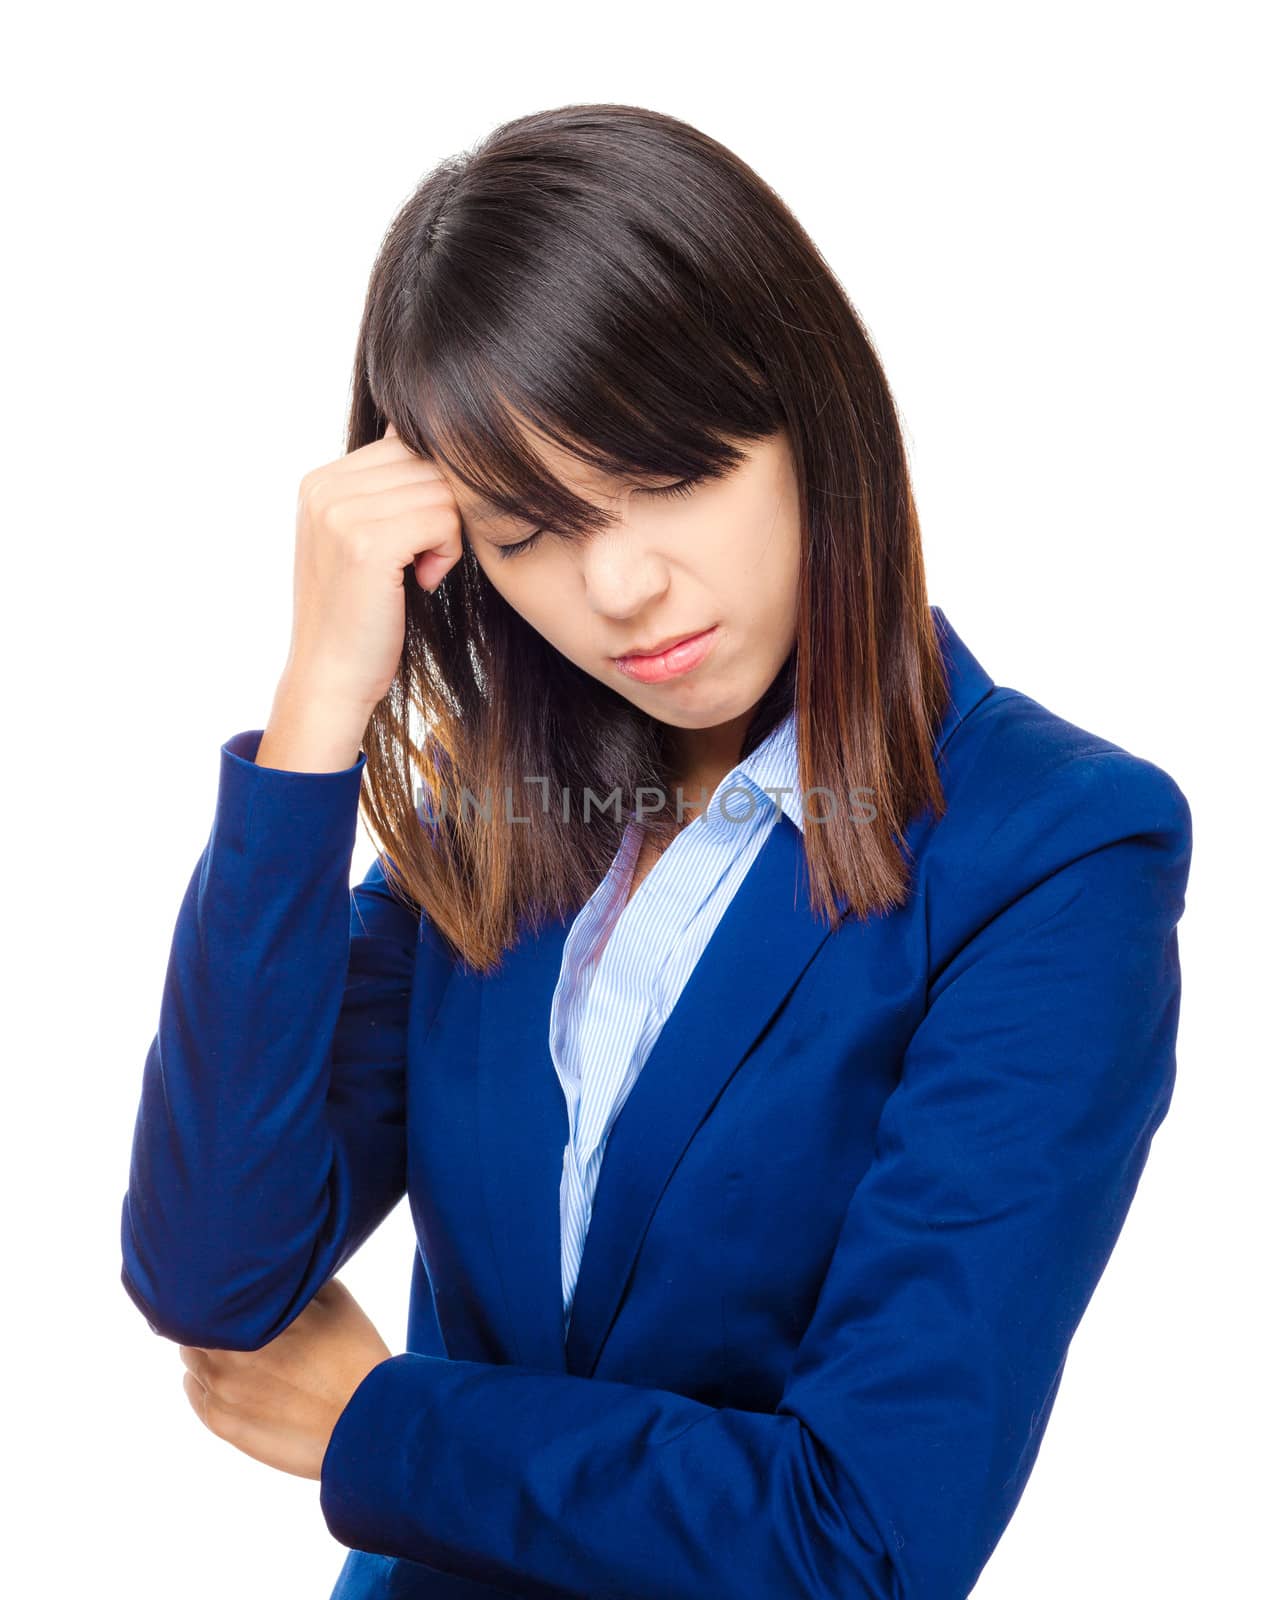 Asian business woman with serious headache